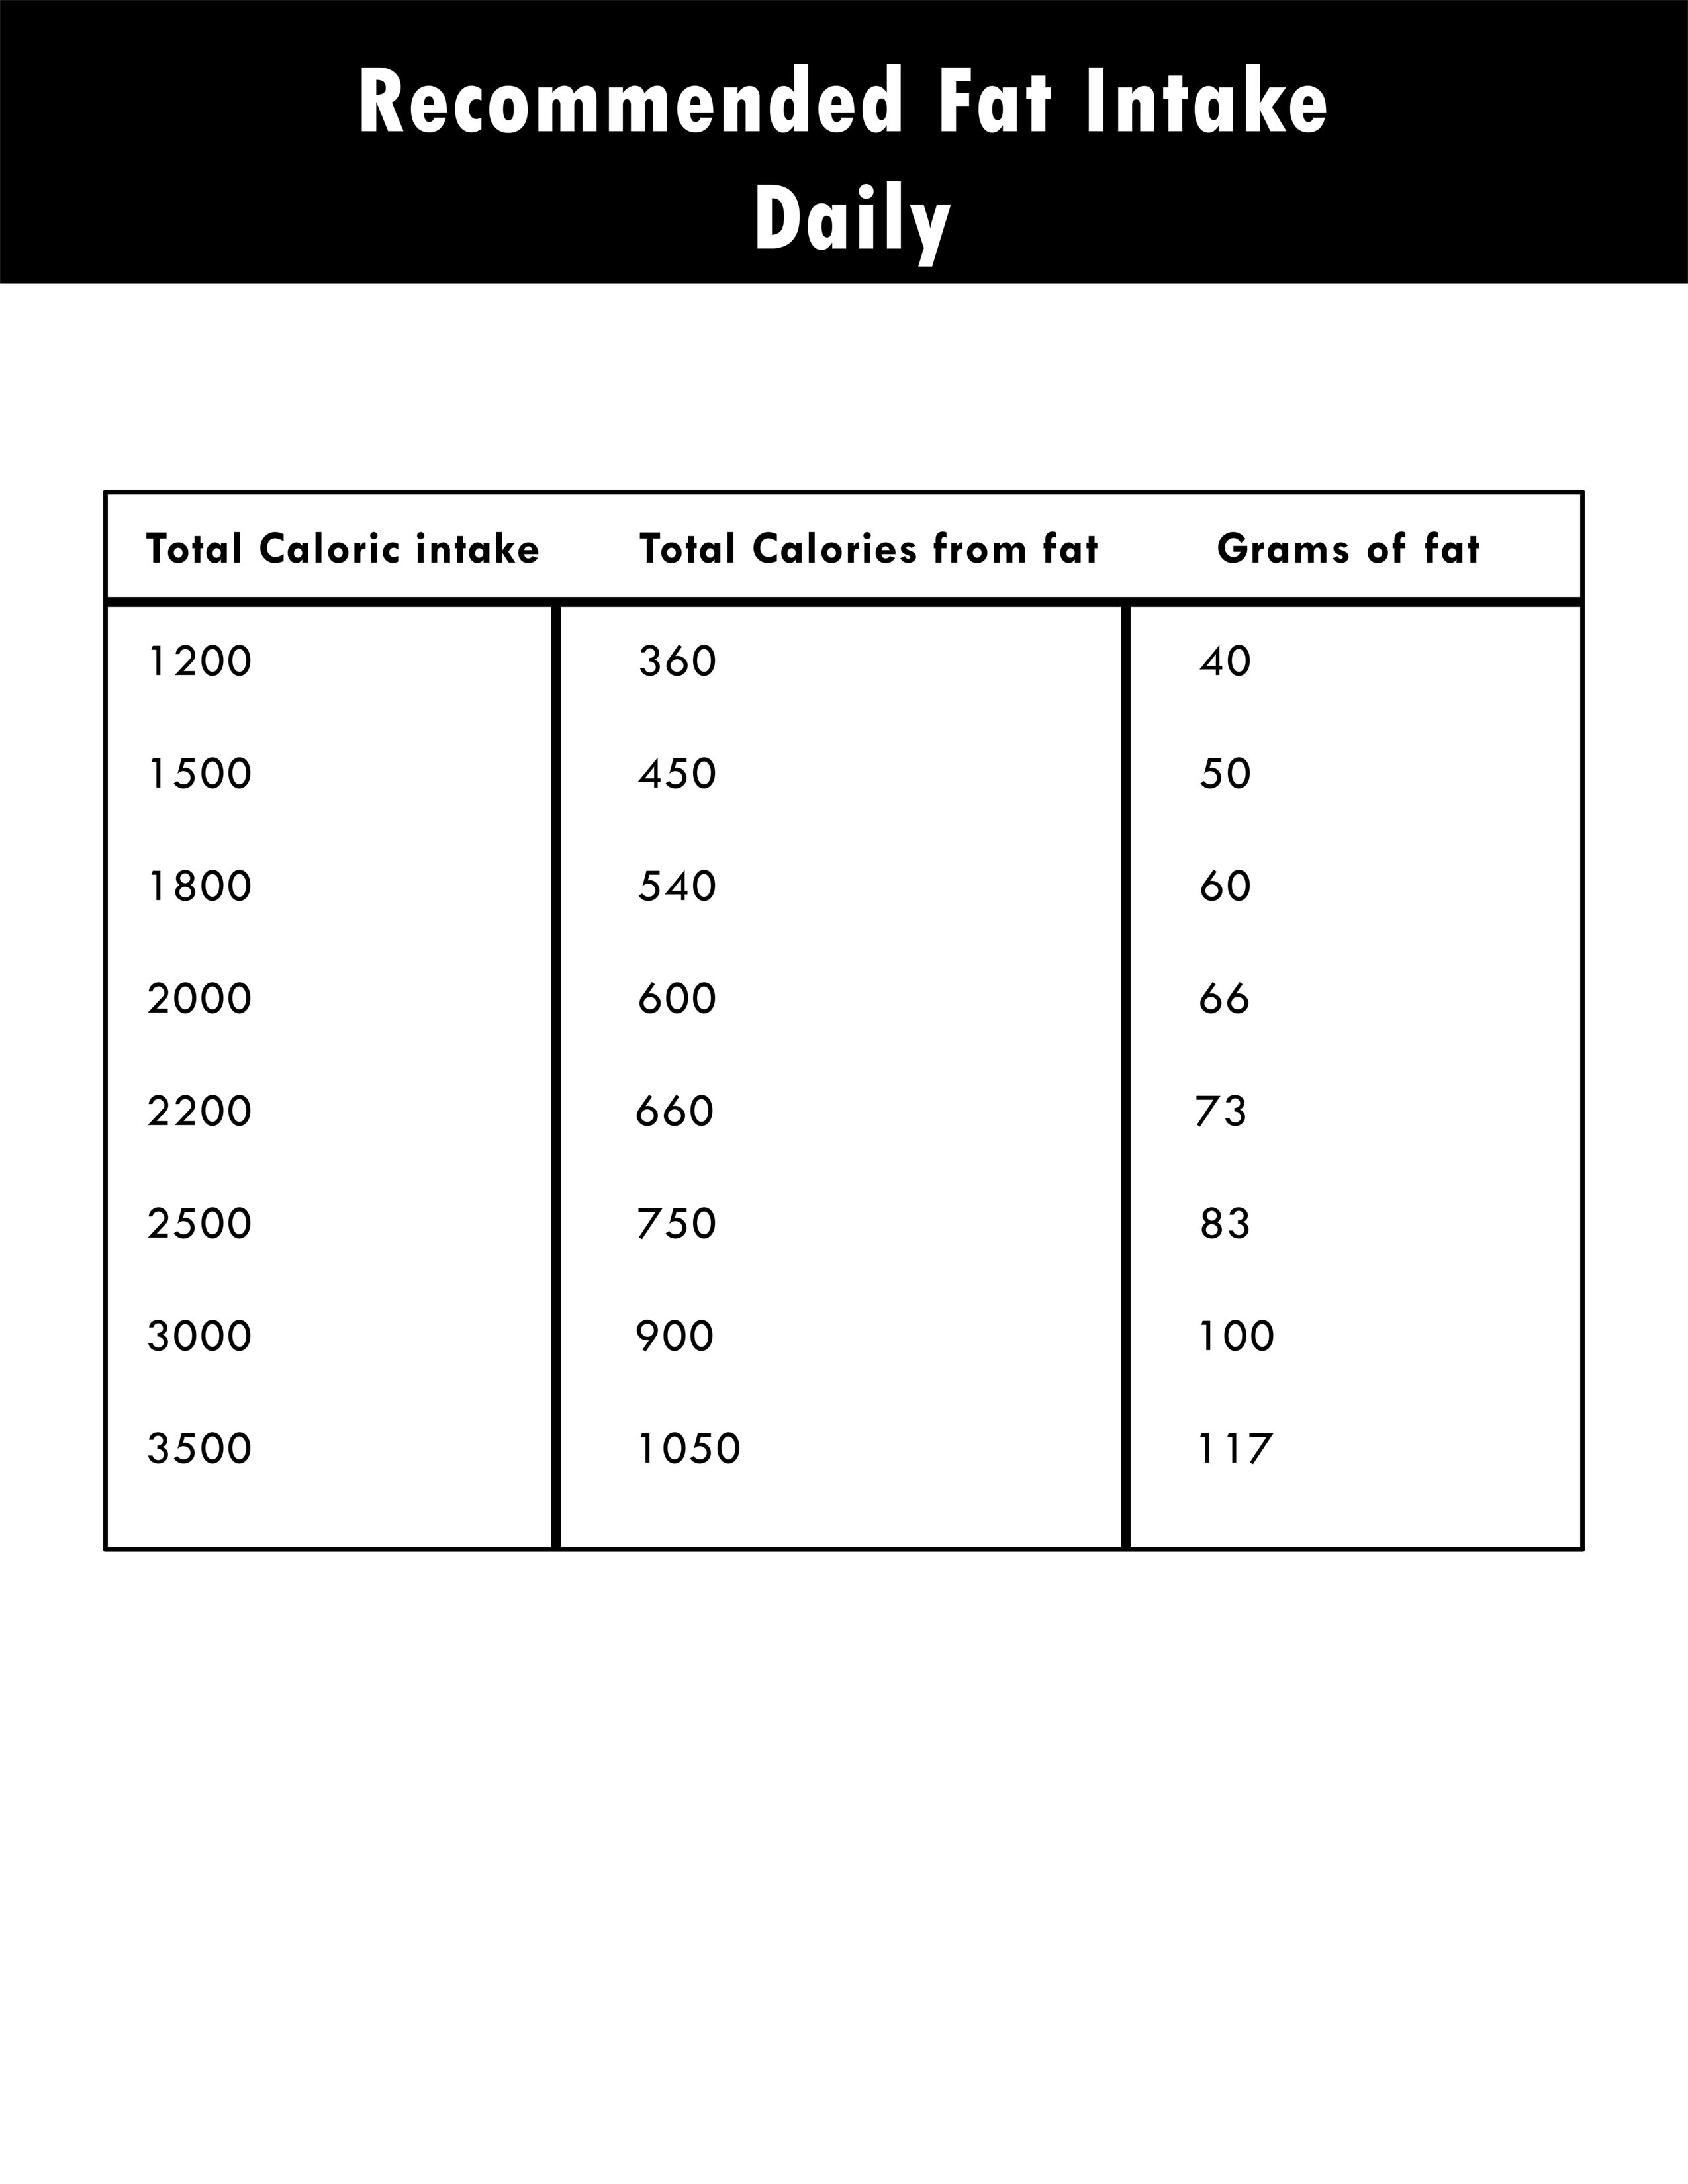 Fat intake guidelines